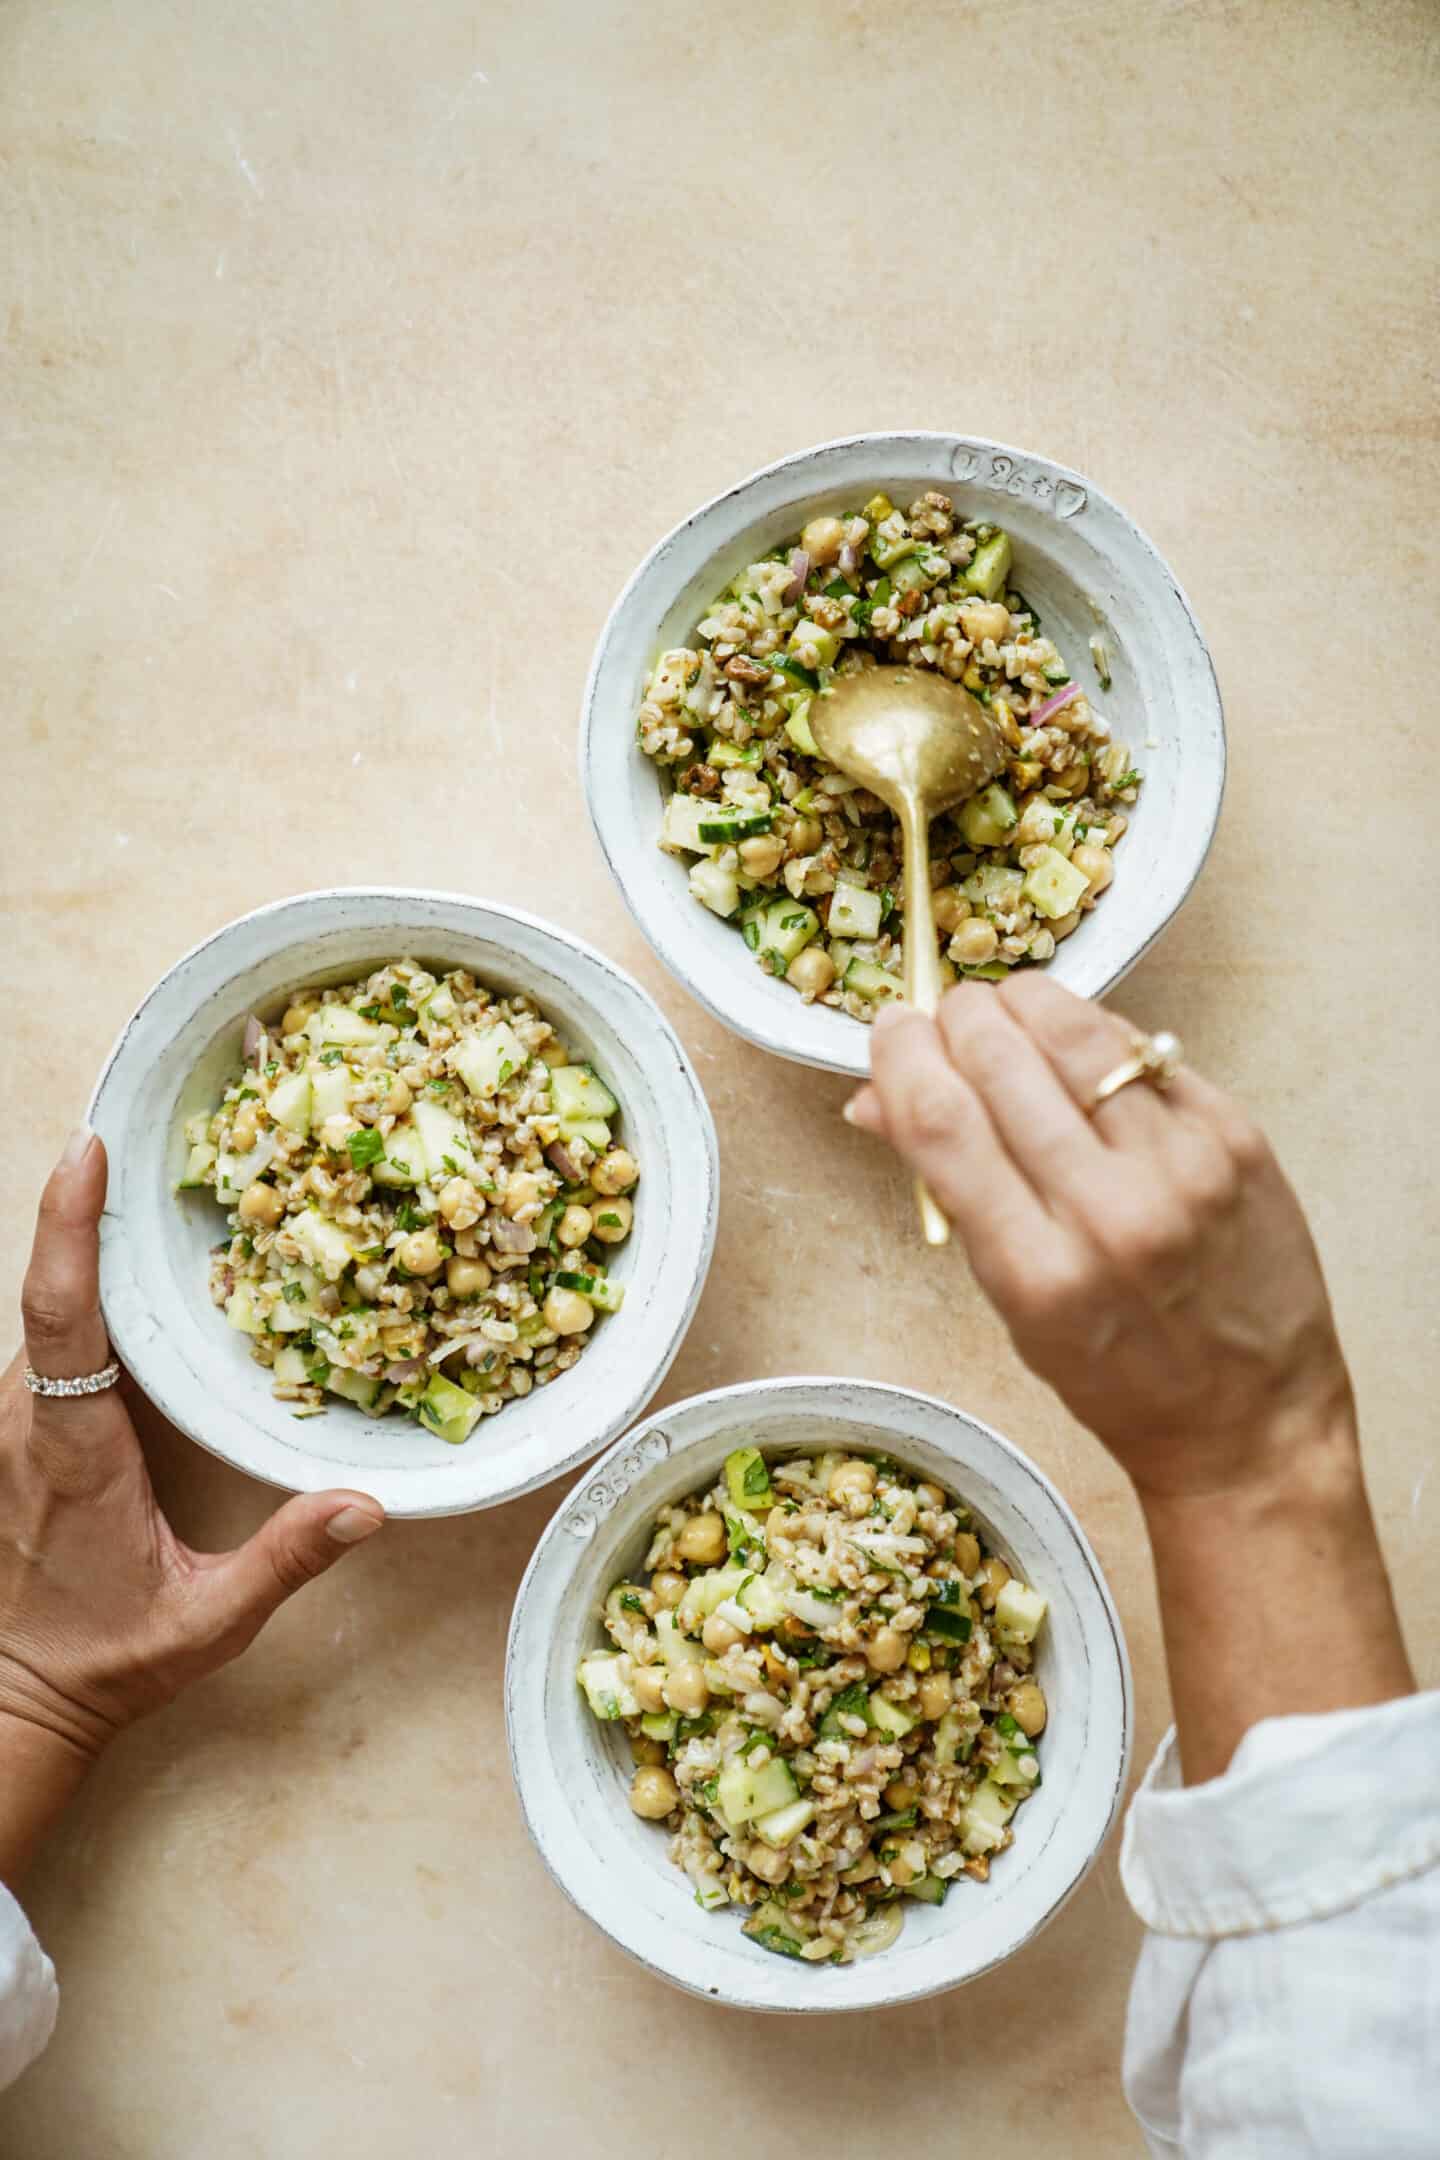 Hand scooping farro salad out of bowl